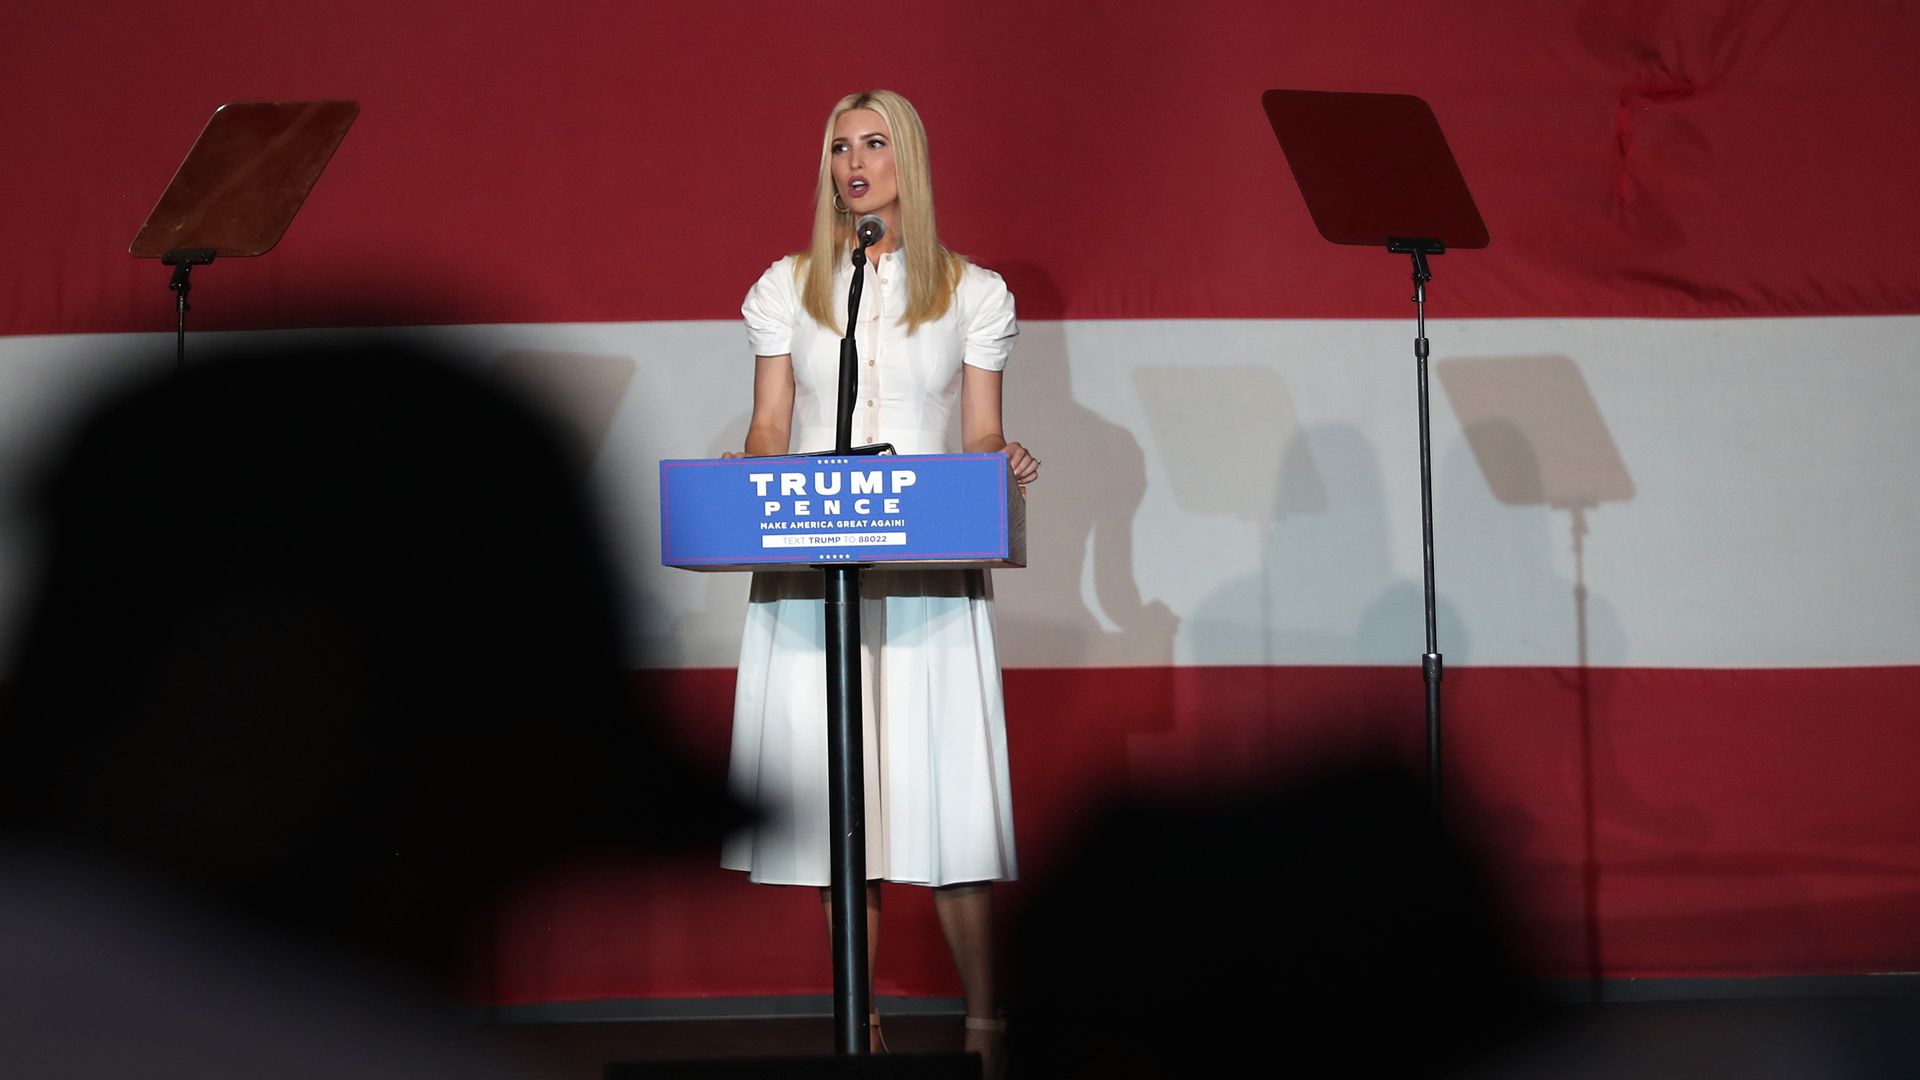 Photo of Ivanka Trump speaking behind a podium at a campaign event for President Donald Trump